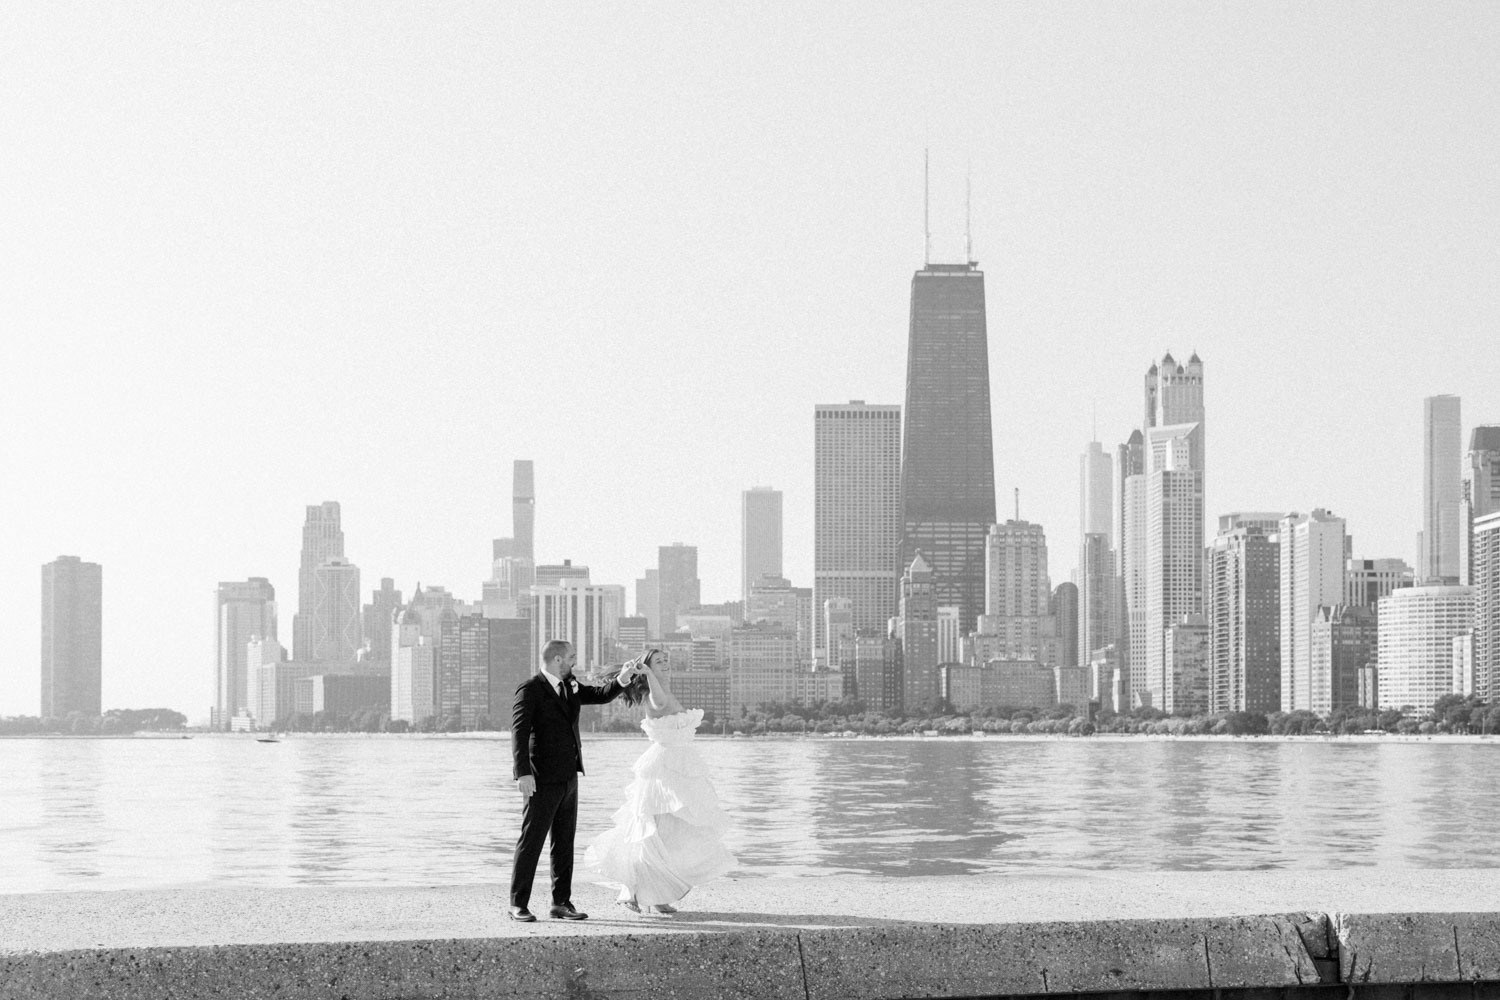 A Chicago elopement portrait in front of the city skyline